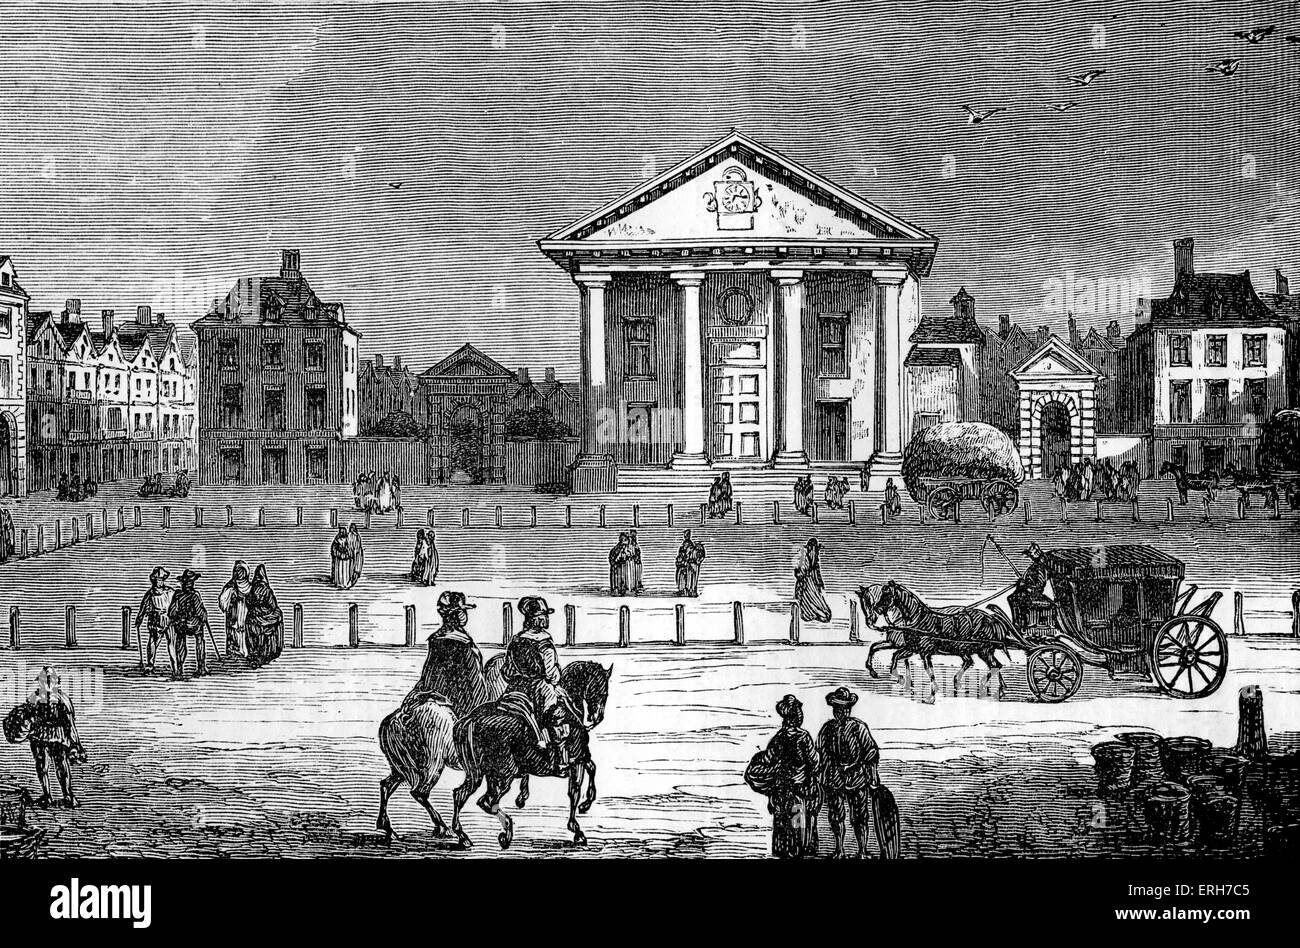 Covent Garden, London, in 1650. Street scene showing riders, carriages, horse and cart, and various passers-by. Stock Photo